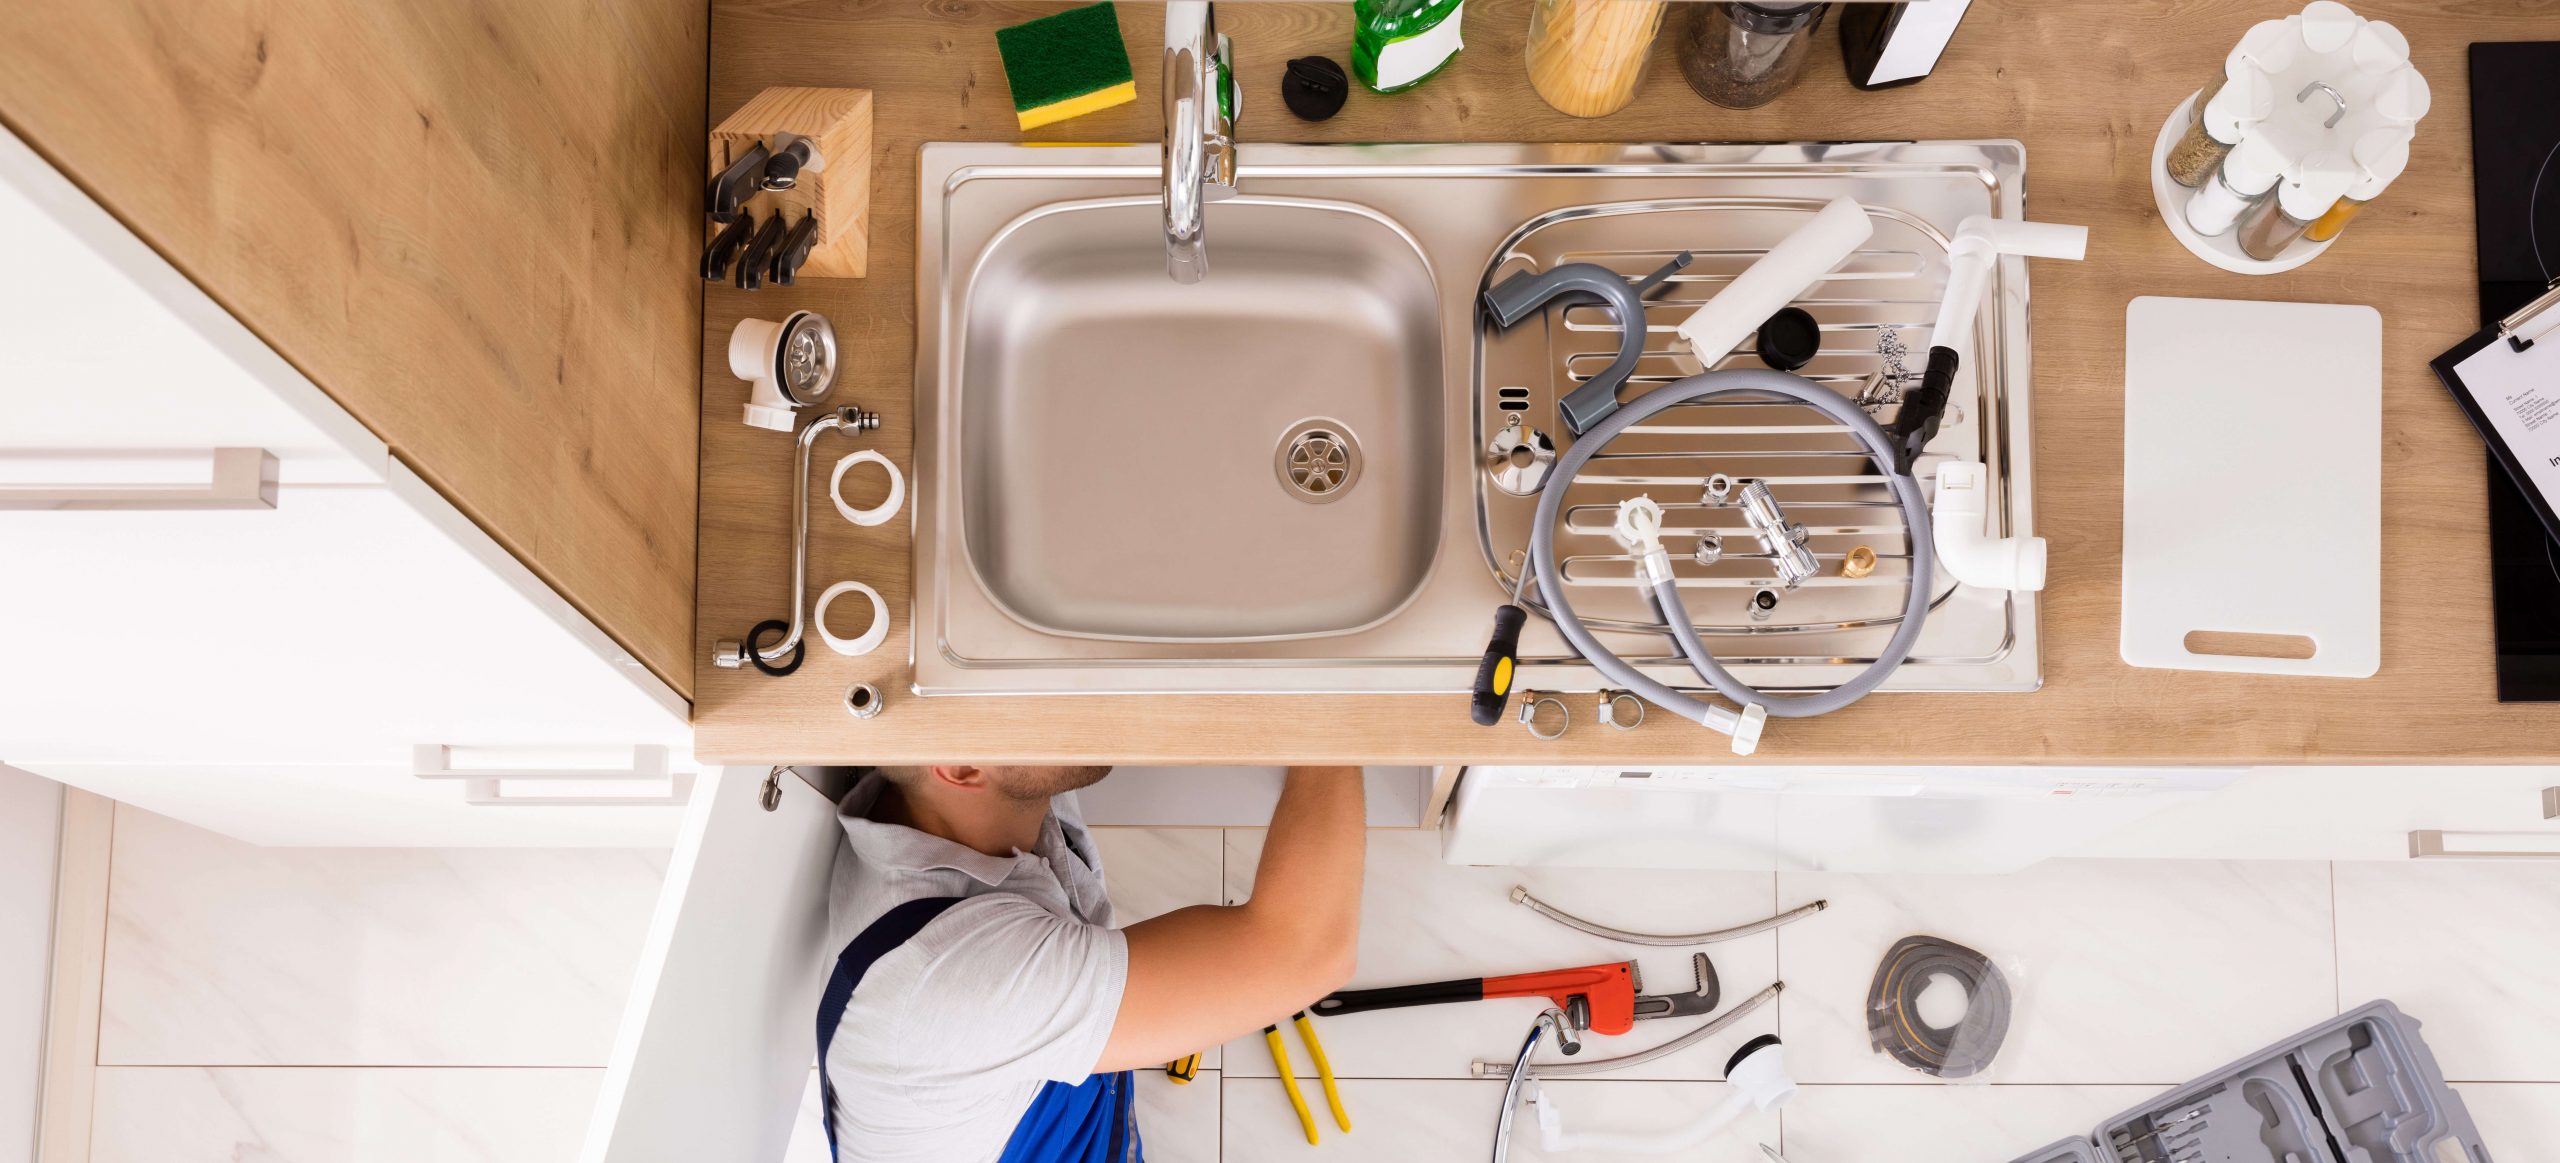 Plumb a Kitchen Sink With Disposal and Dishwasher 1